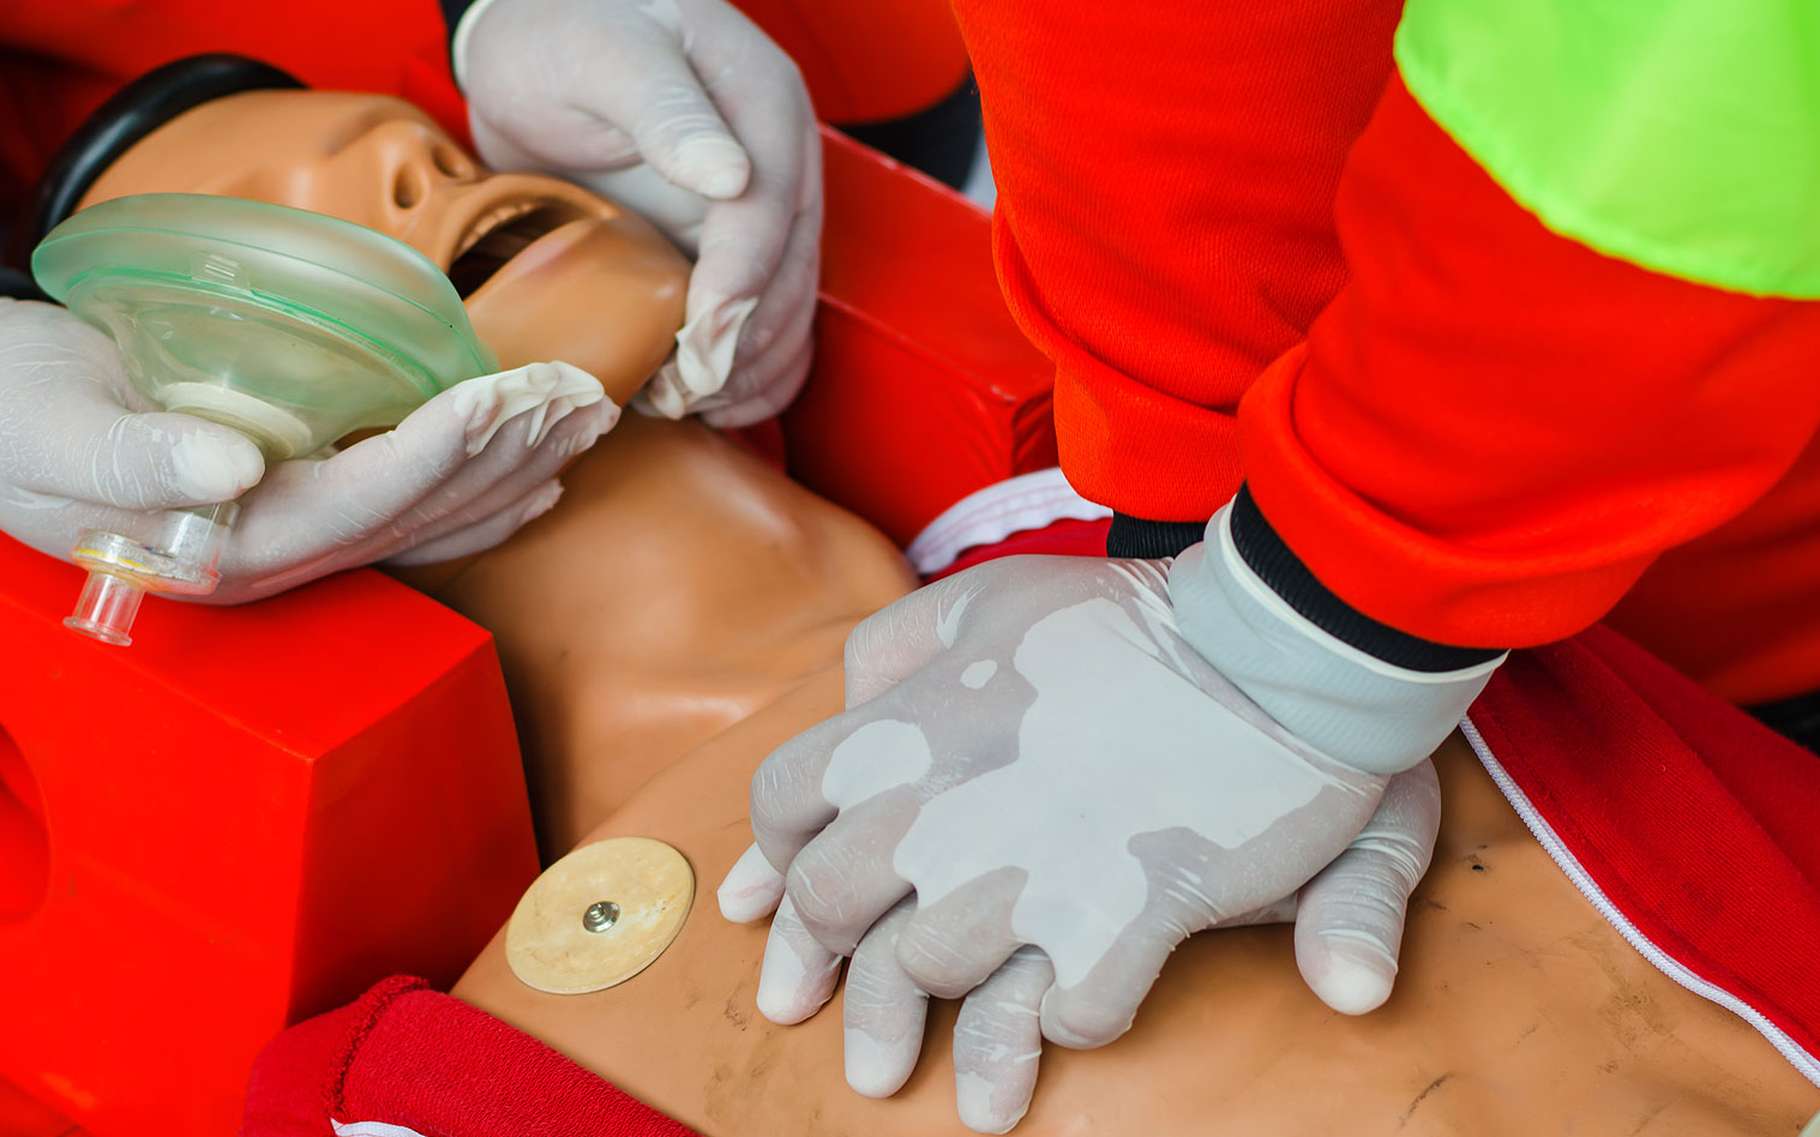 Why Should You Take A Remote First Aid Training Course?